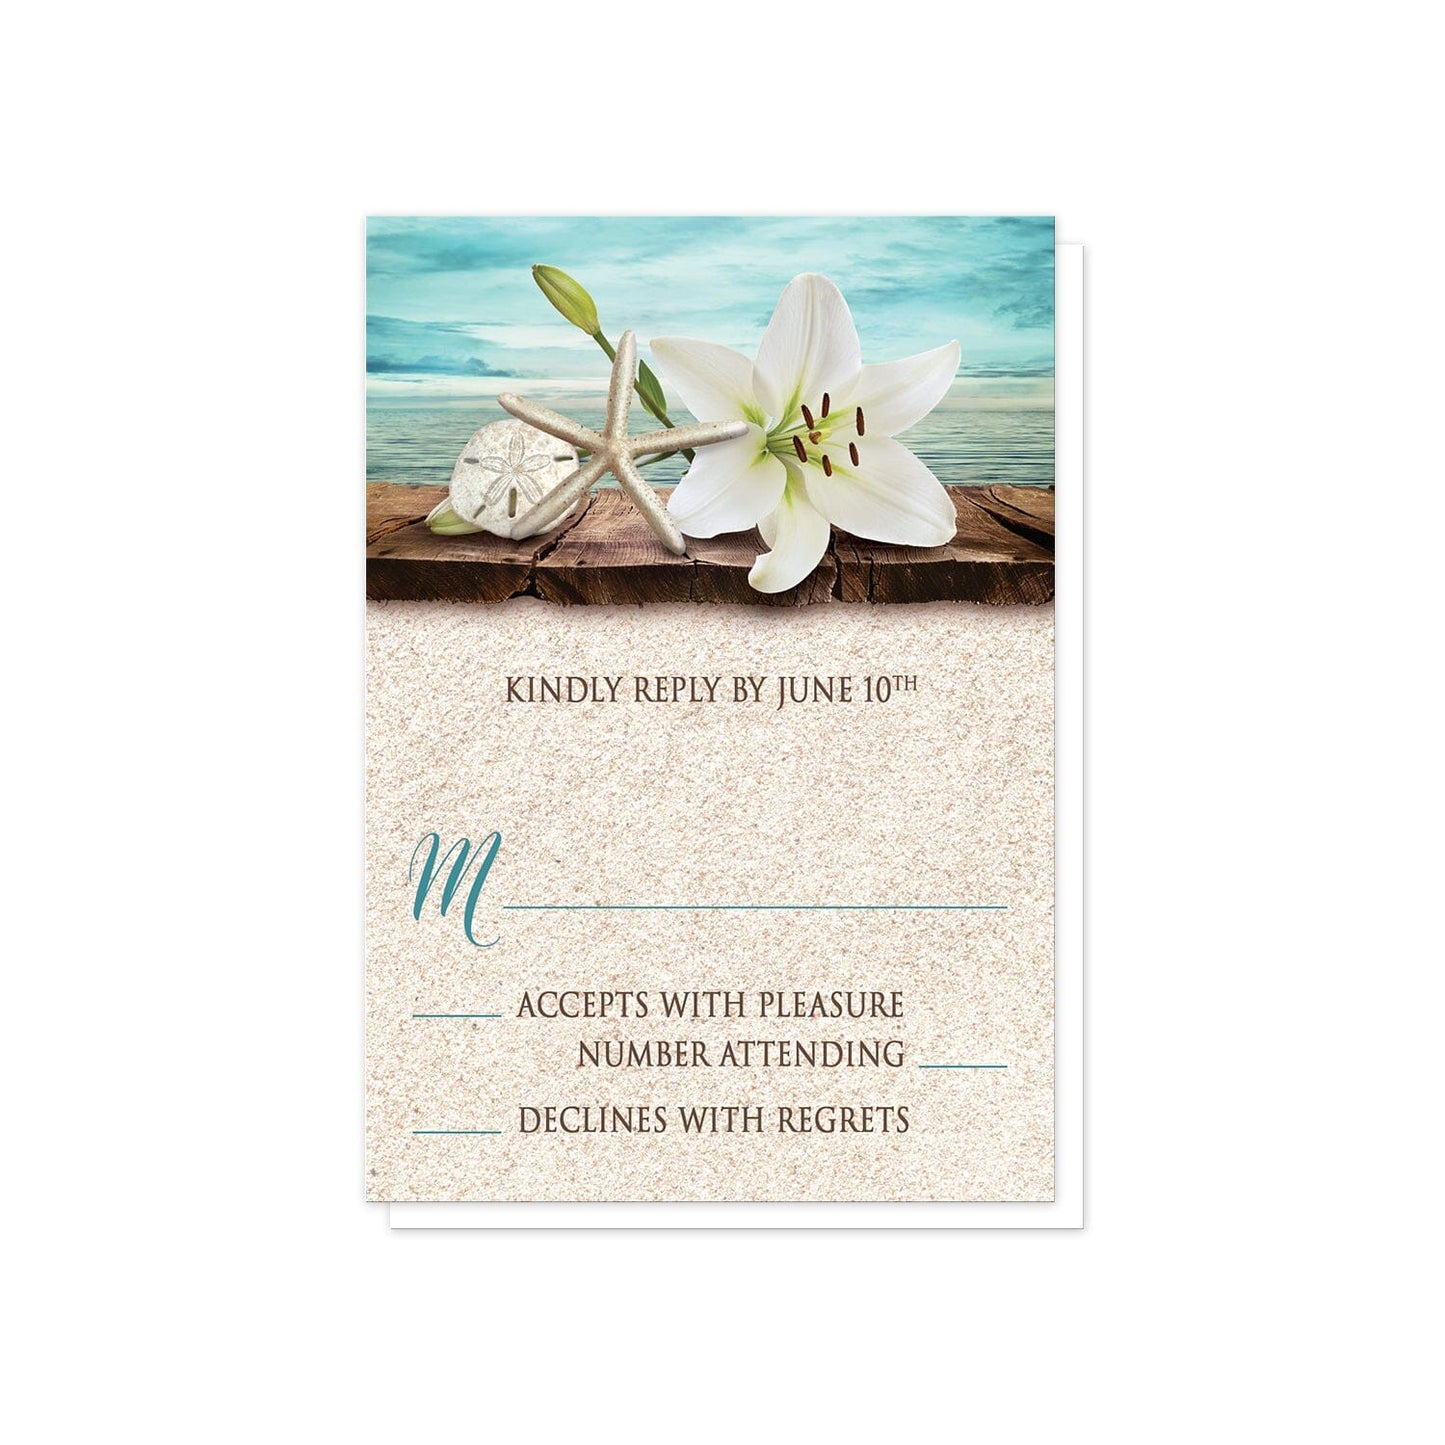 Lily Seashells and Sand Beach RSVP Cards at Artistically Invited.